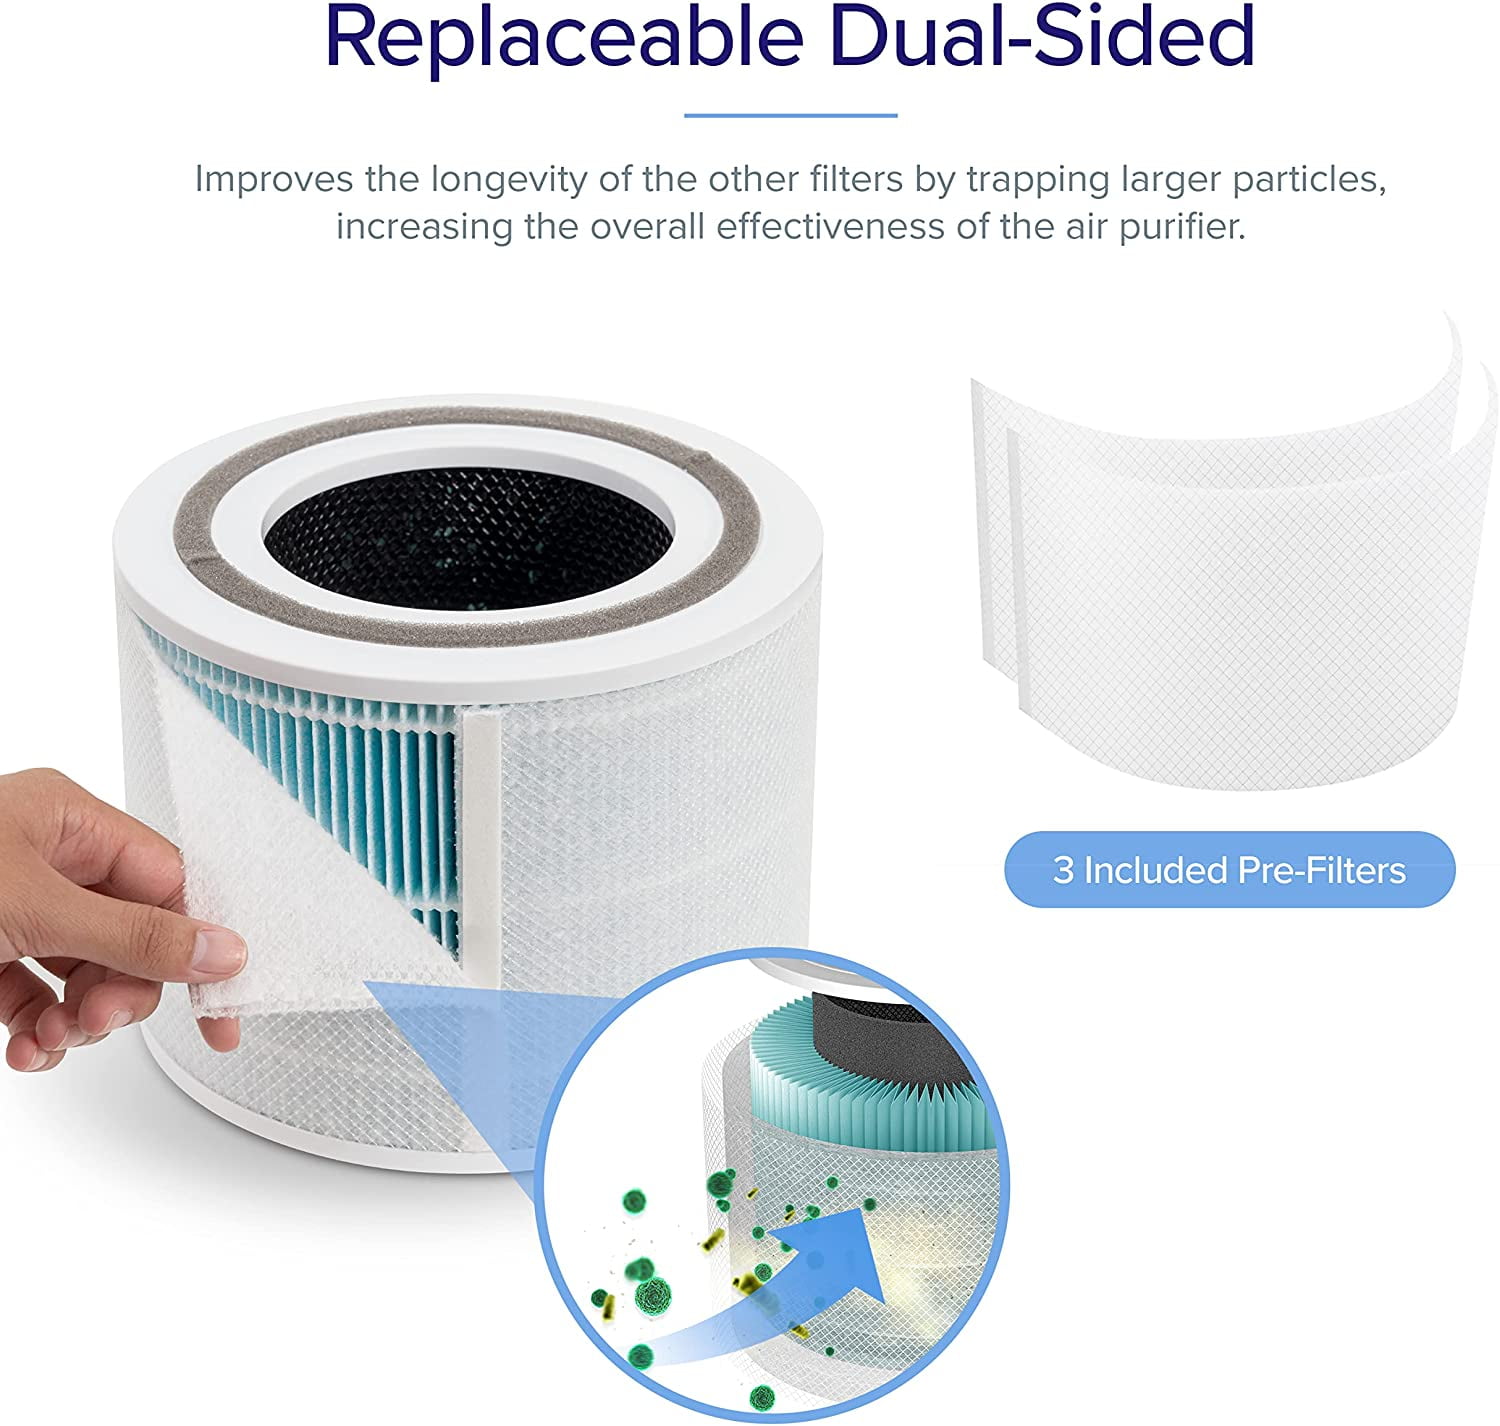 2× Levoit Core 300 RF-SR True HEPA 4-Stage Smoke Remover Replacement Filter  for sale online